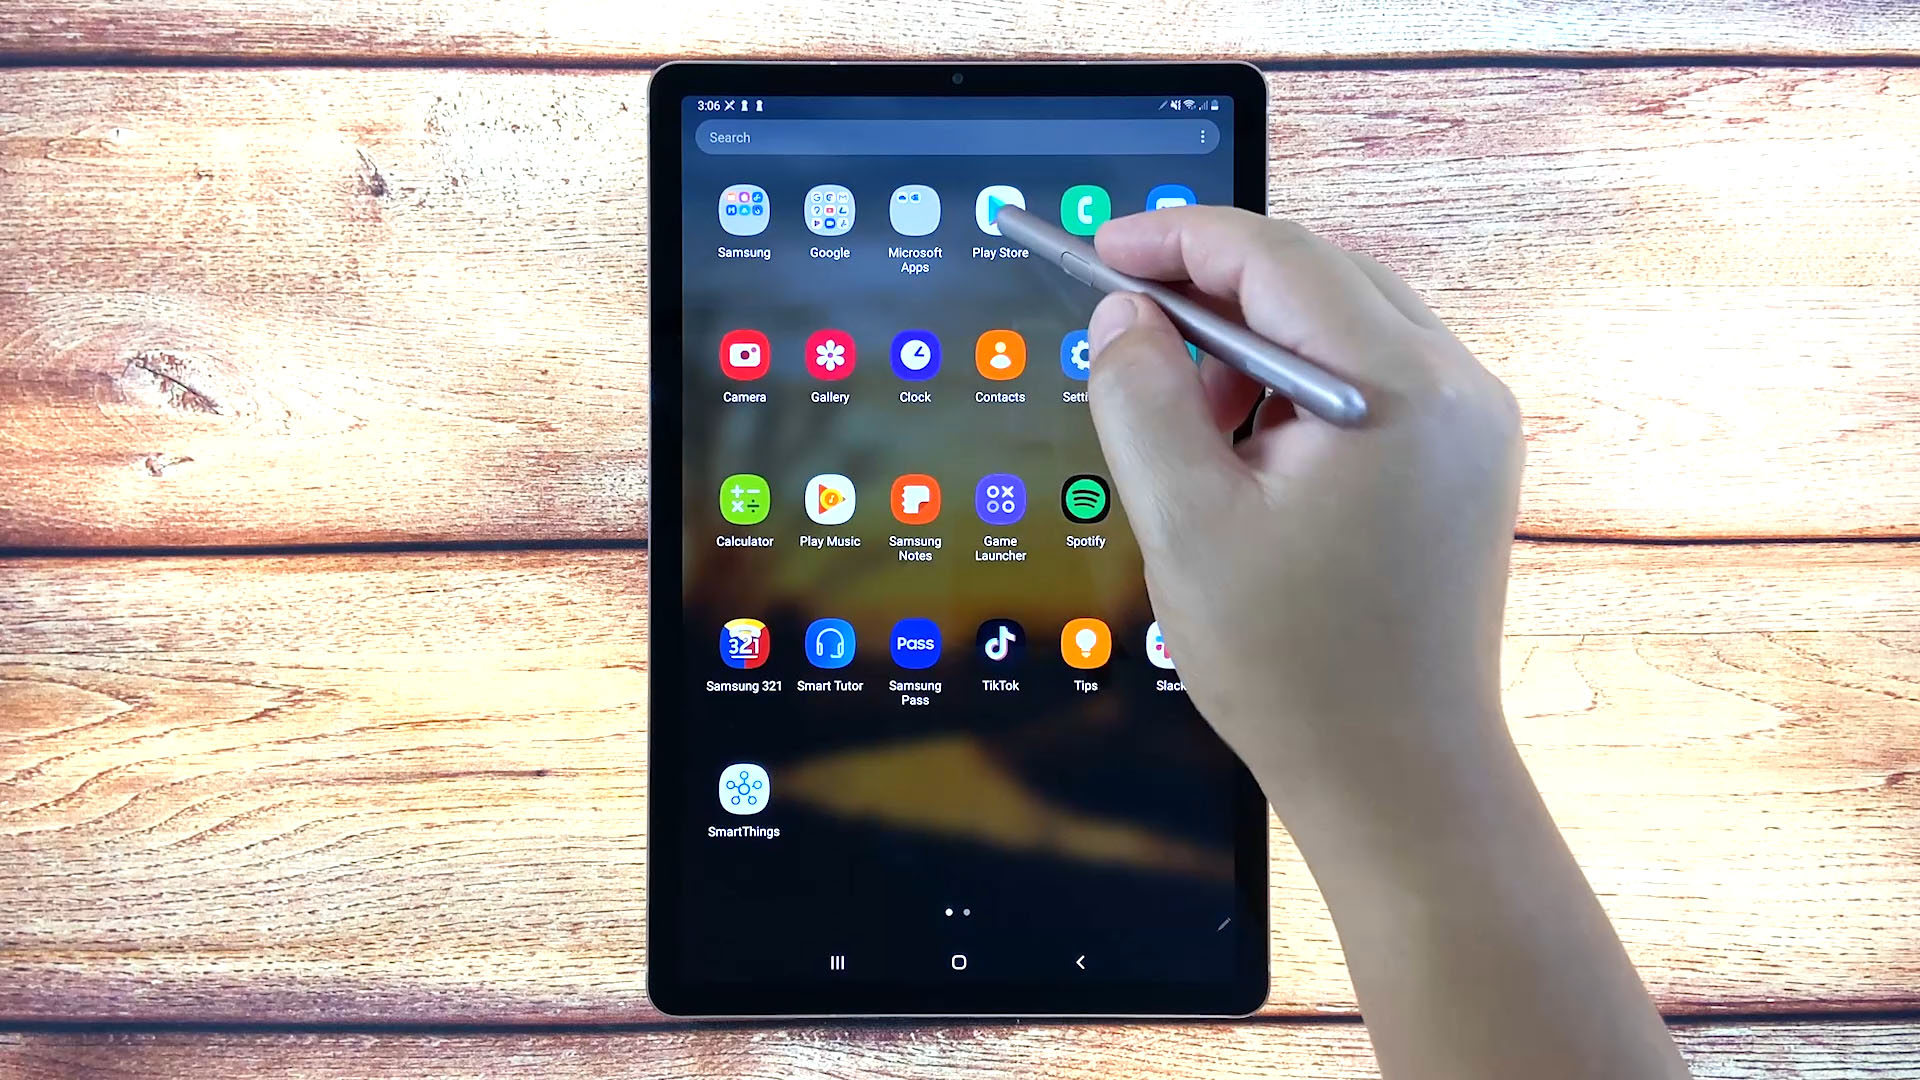 rename app icon tab s6 home screen-playstore